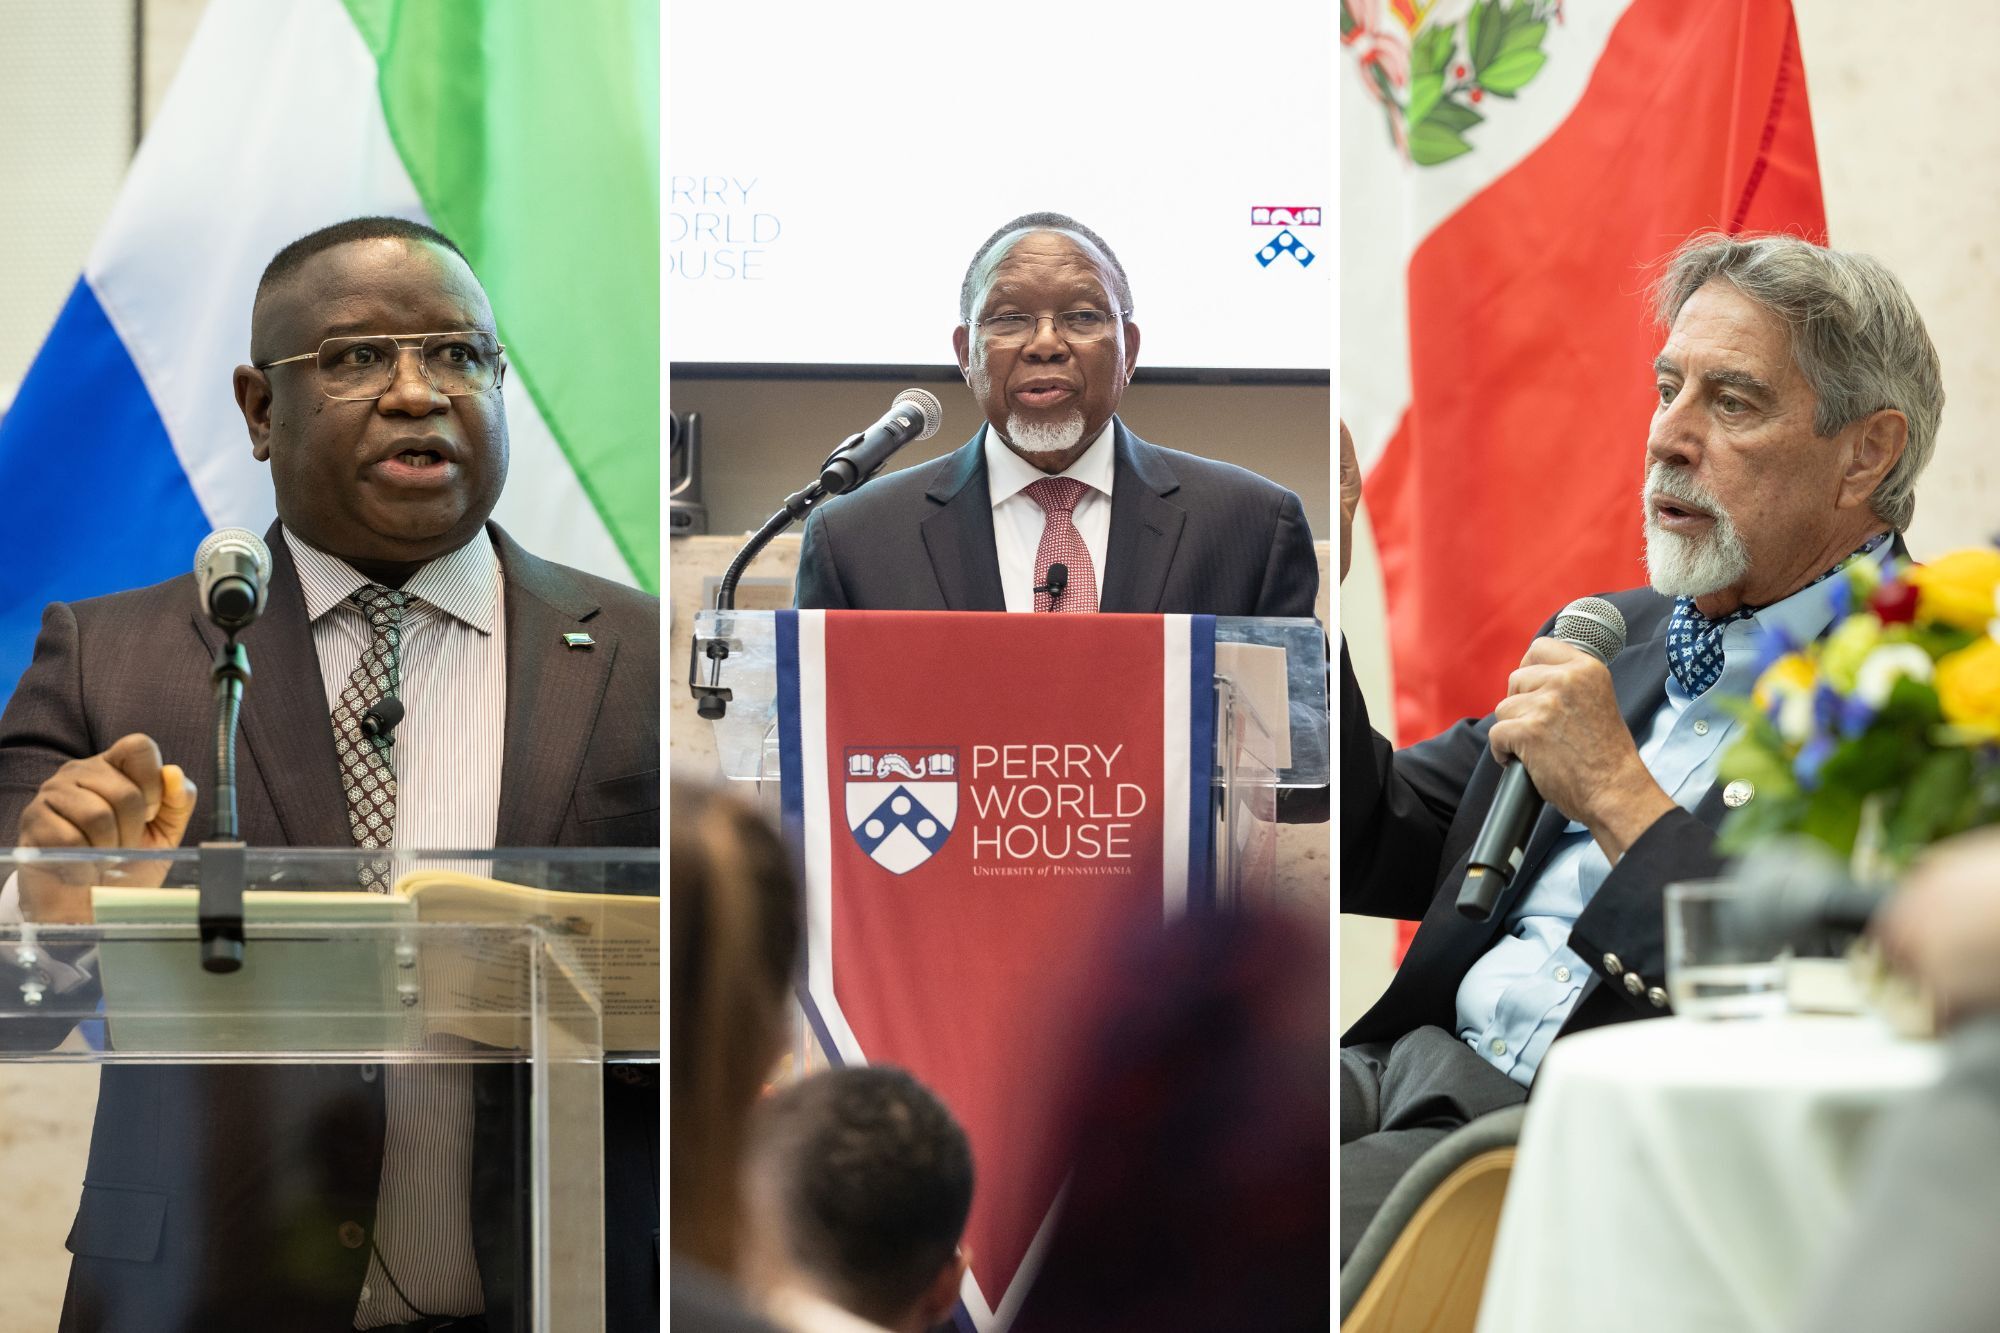 A trio of events welcome world leaders to Penn